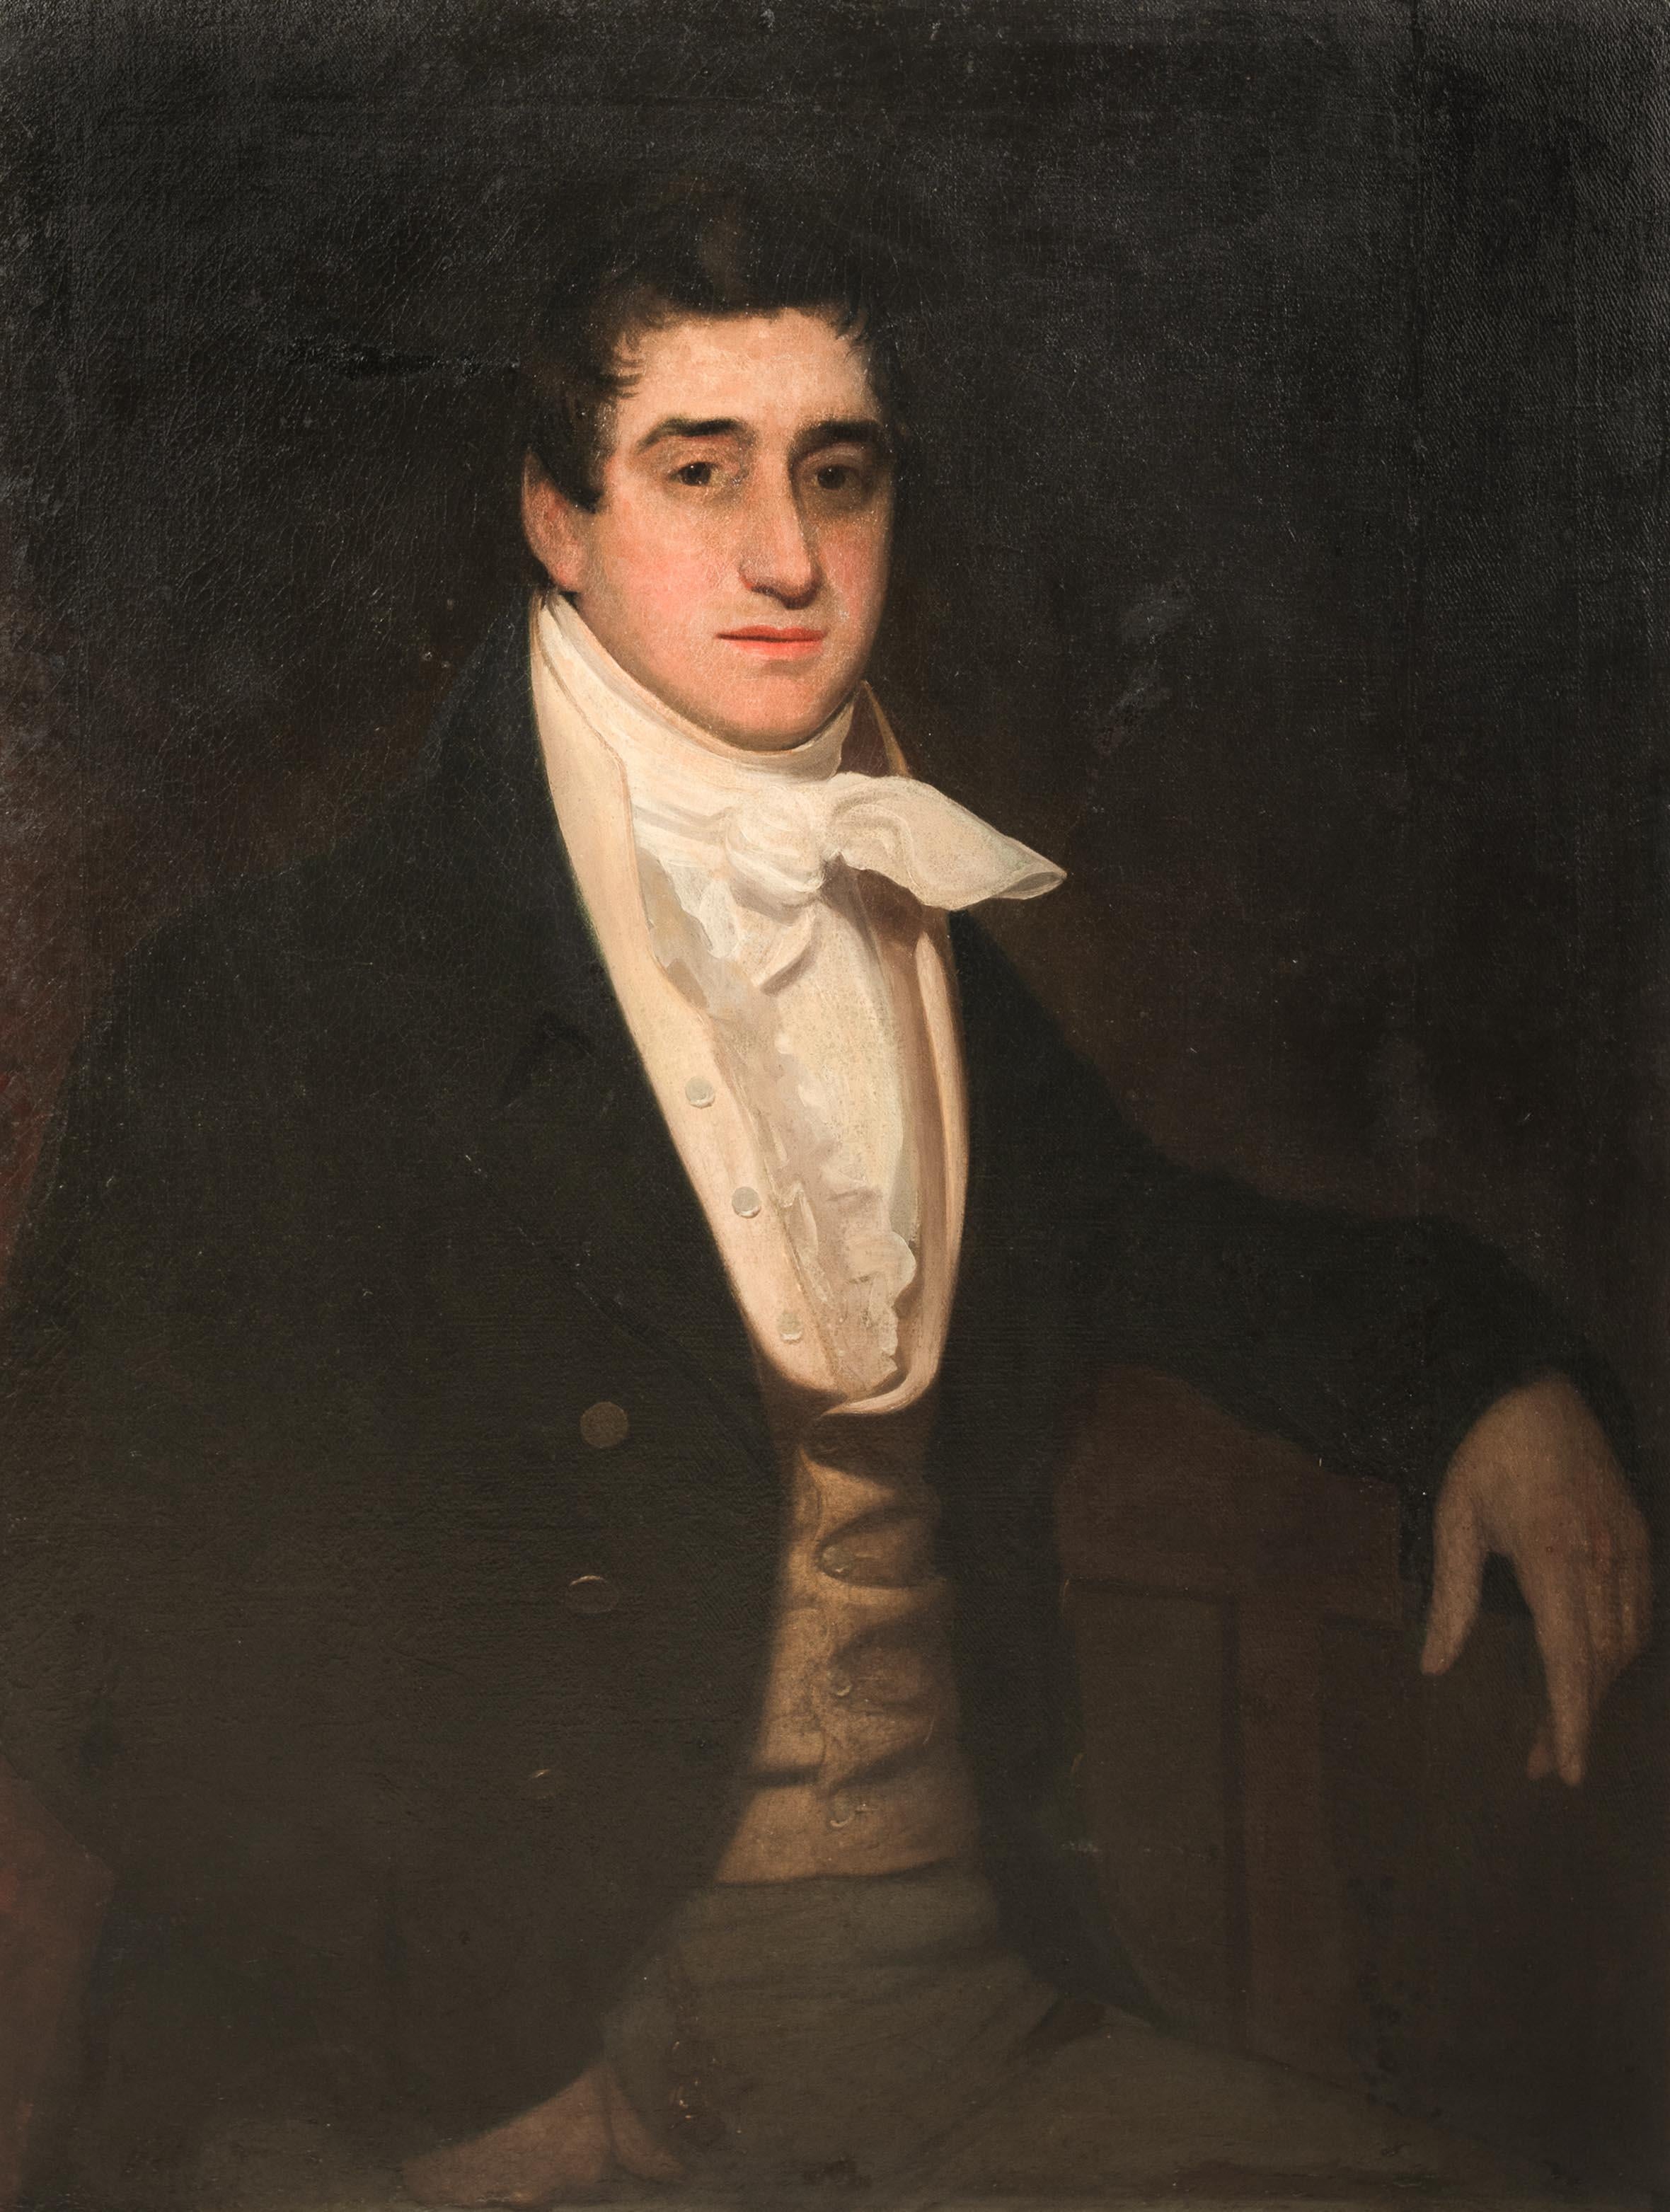 Portrait of Lord Napier - William John Napier (1786-1834)

circle of Sir Thomas Lawrence (1769-1830)

Large 19th Century English portrait identified as Lord Napier, William John Napier, oil on canvas. Good quality and condition three quarter length